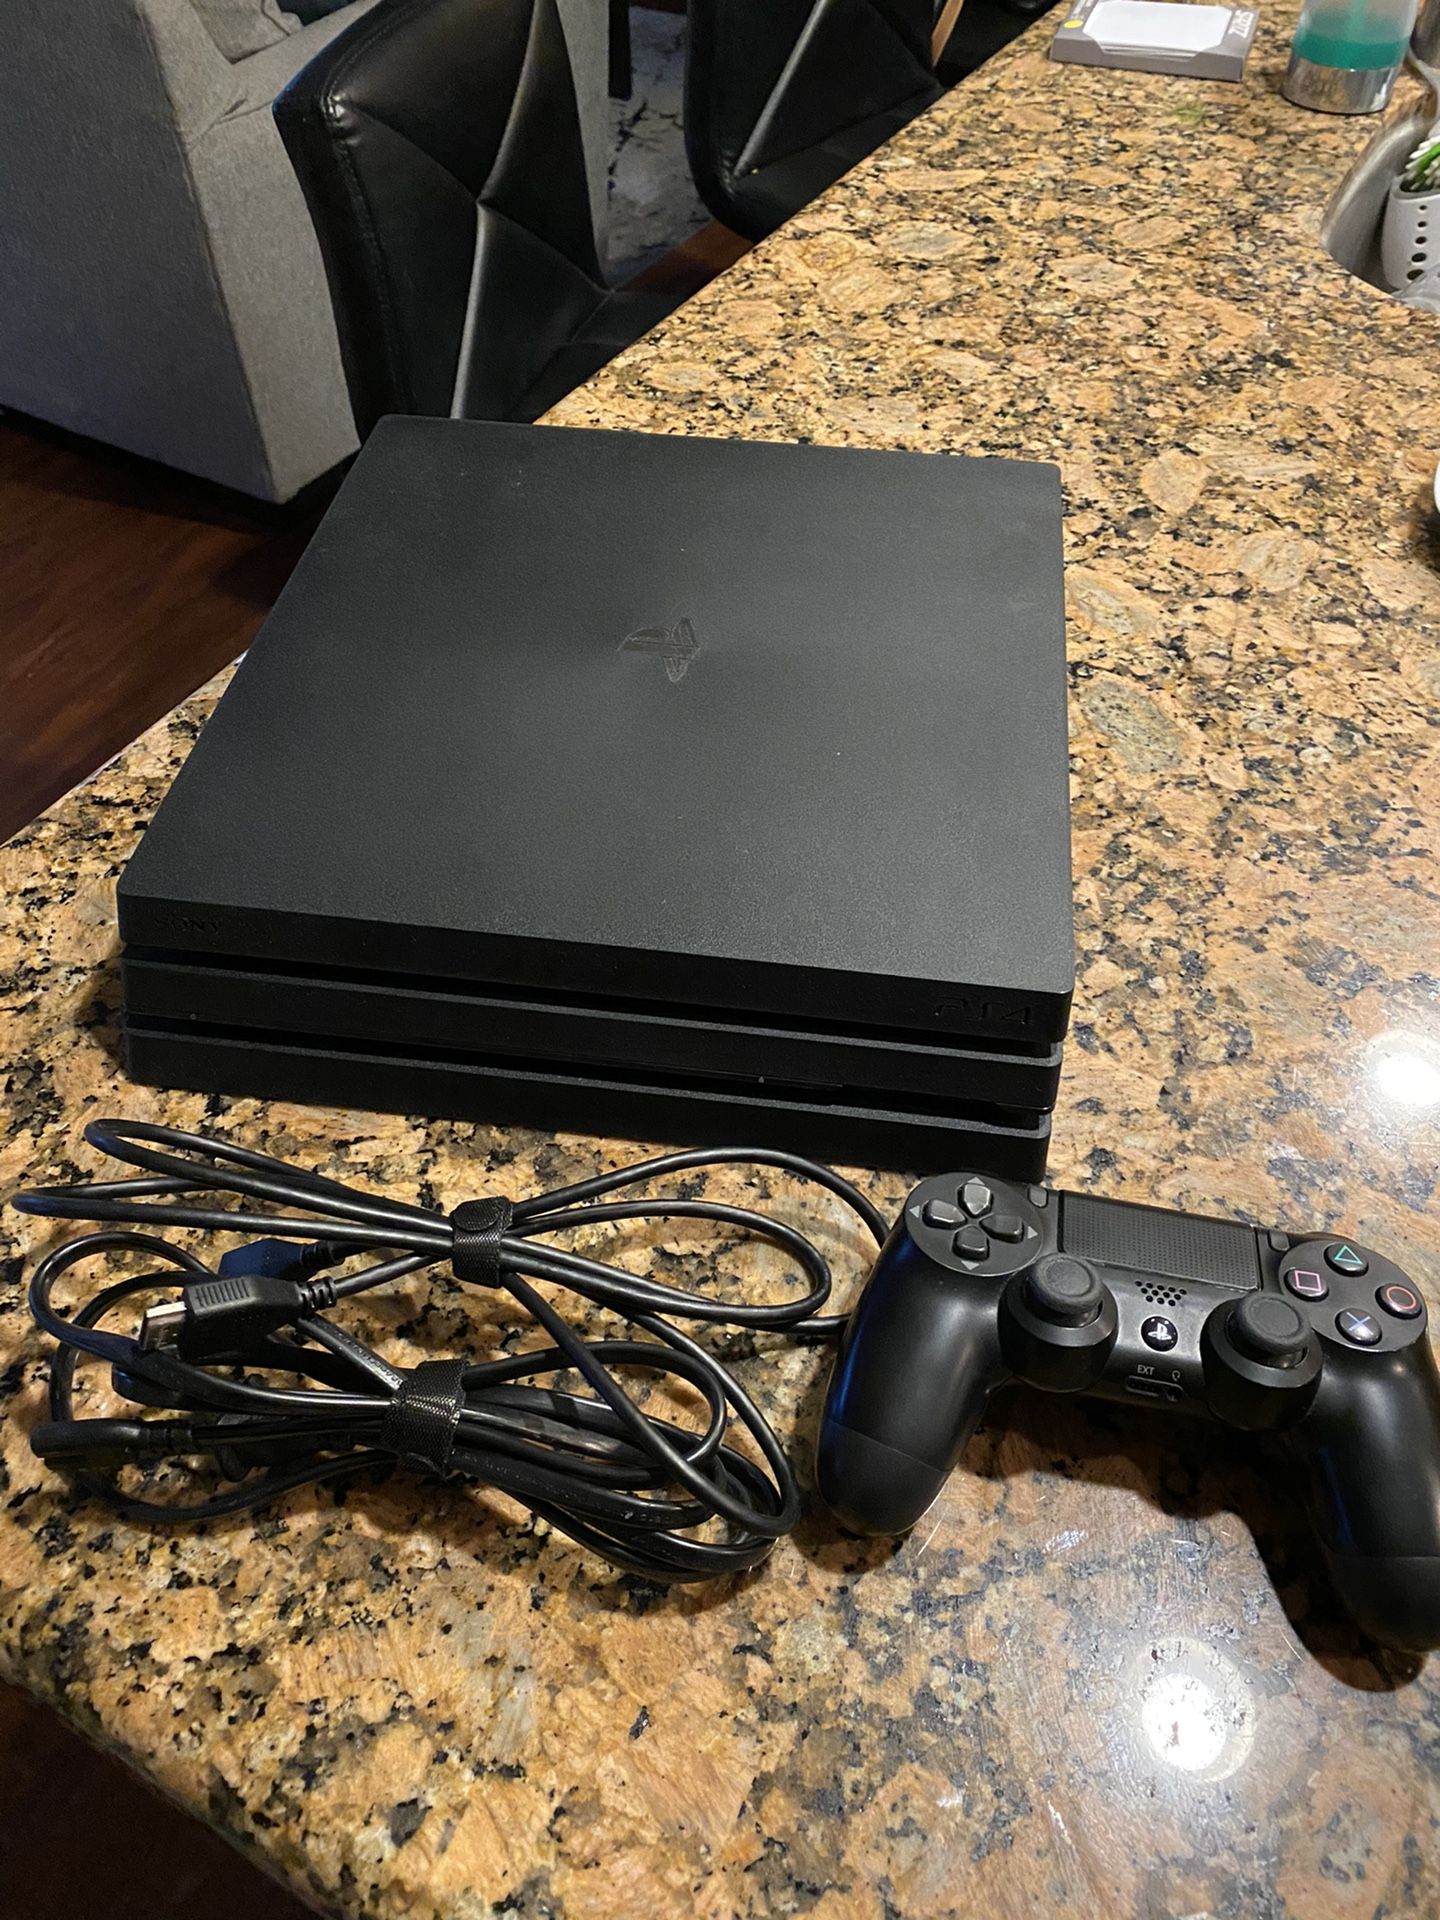 PlayStation 4 Like New Condition! Extra Controller & 2 Games!